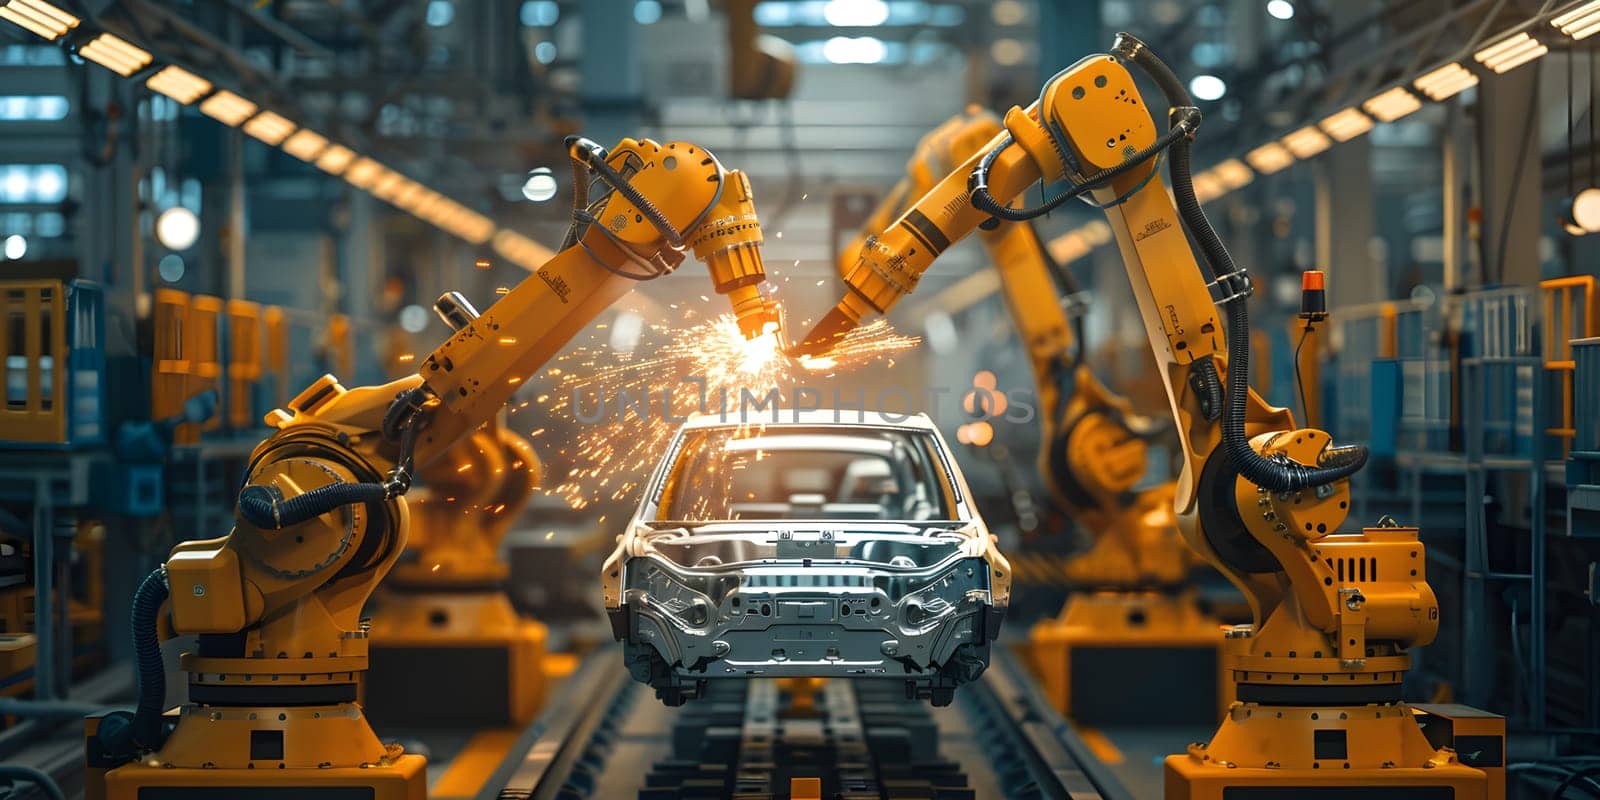 Robots in a factory are using engineering and composite materials to assemble a car, combining metal and steel casing pipes in the process